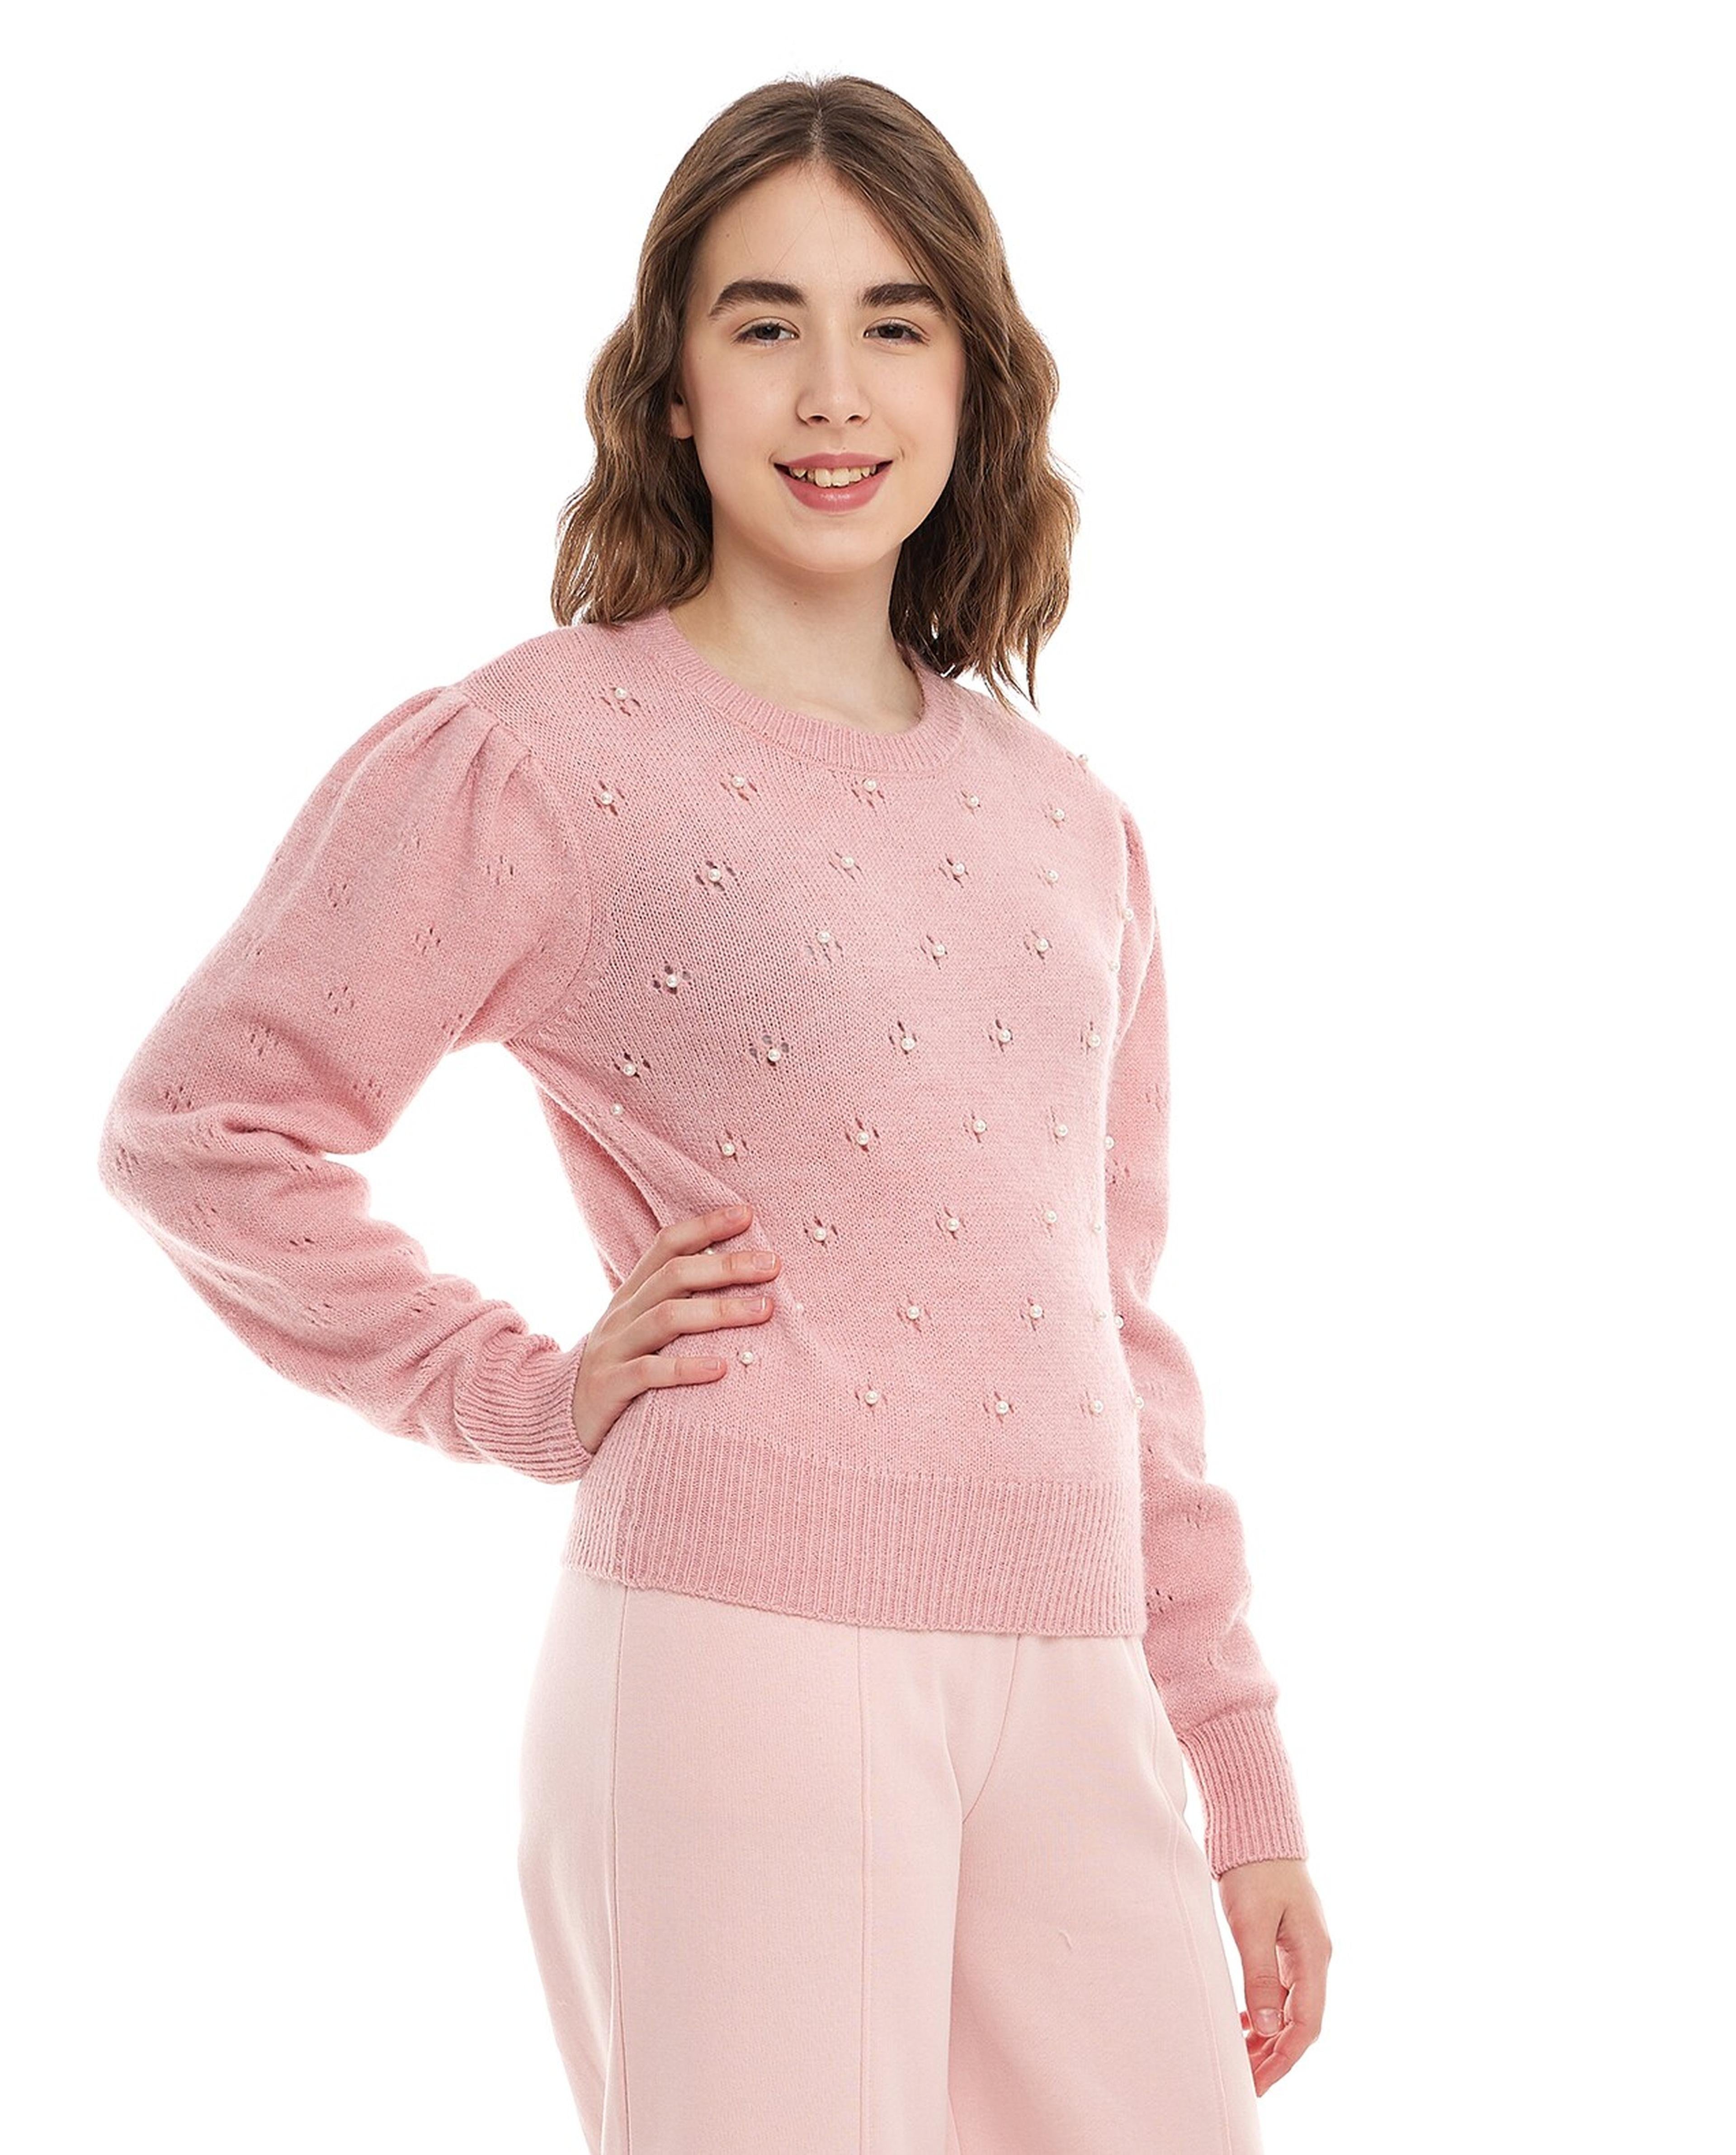 Openwork Sweater with Crew Neck and Puff Sleeves